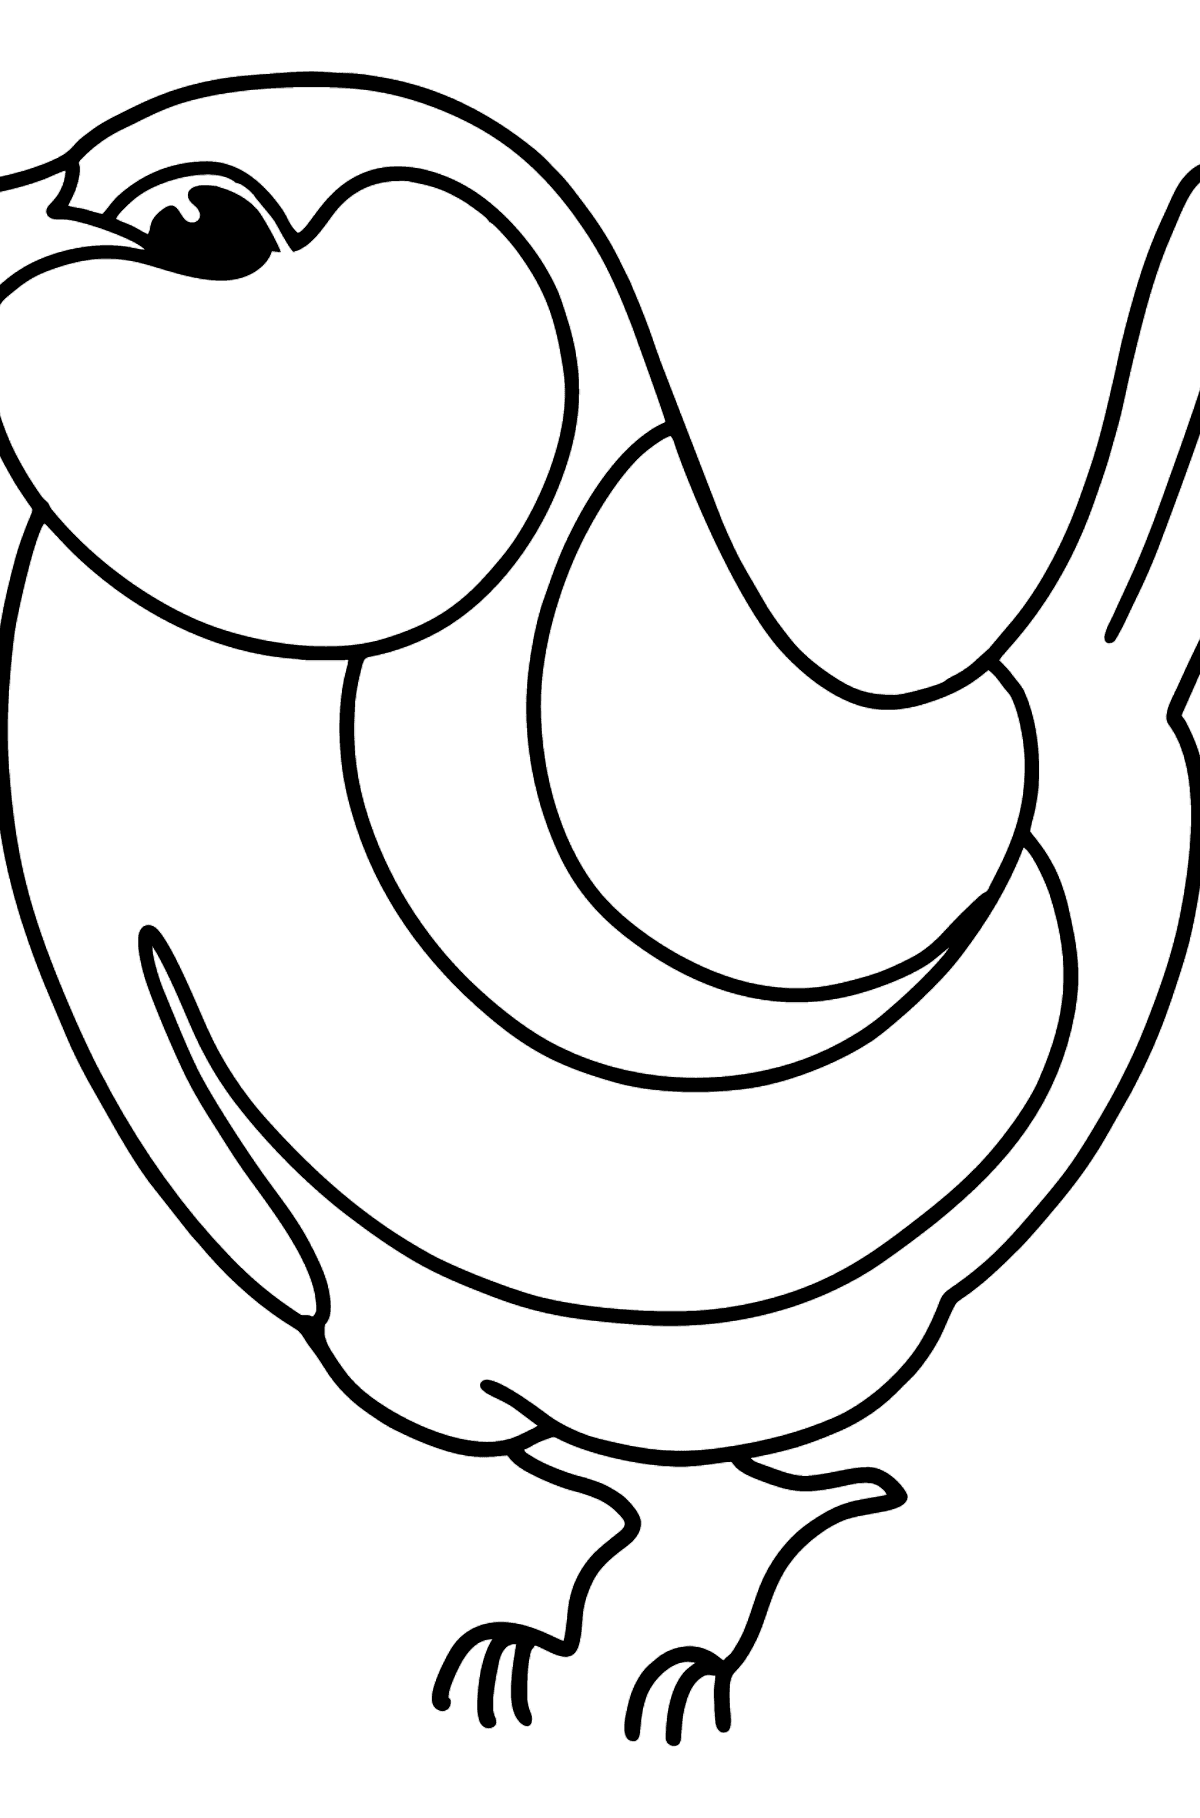 Simple coloring page with a Tit - Coloring Pages for Kids